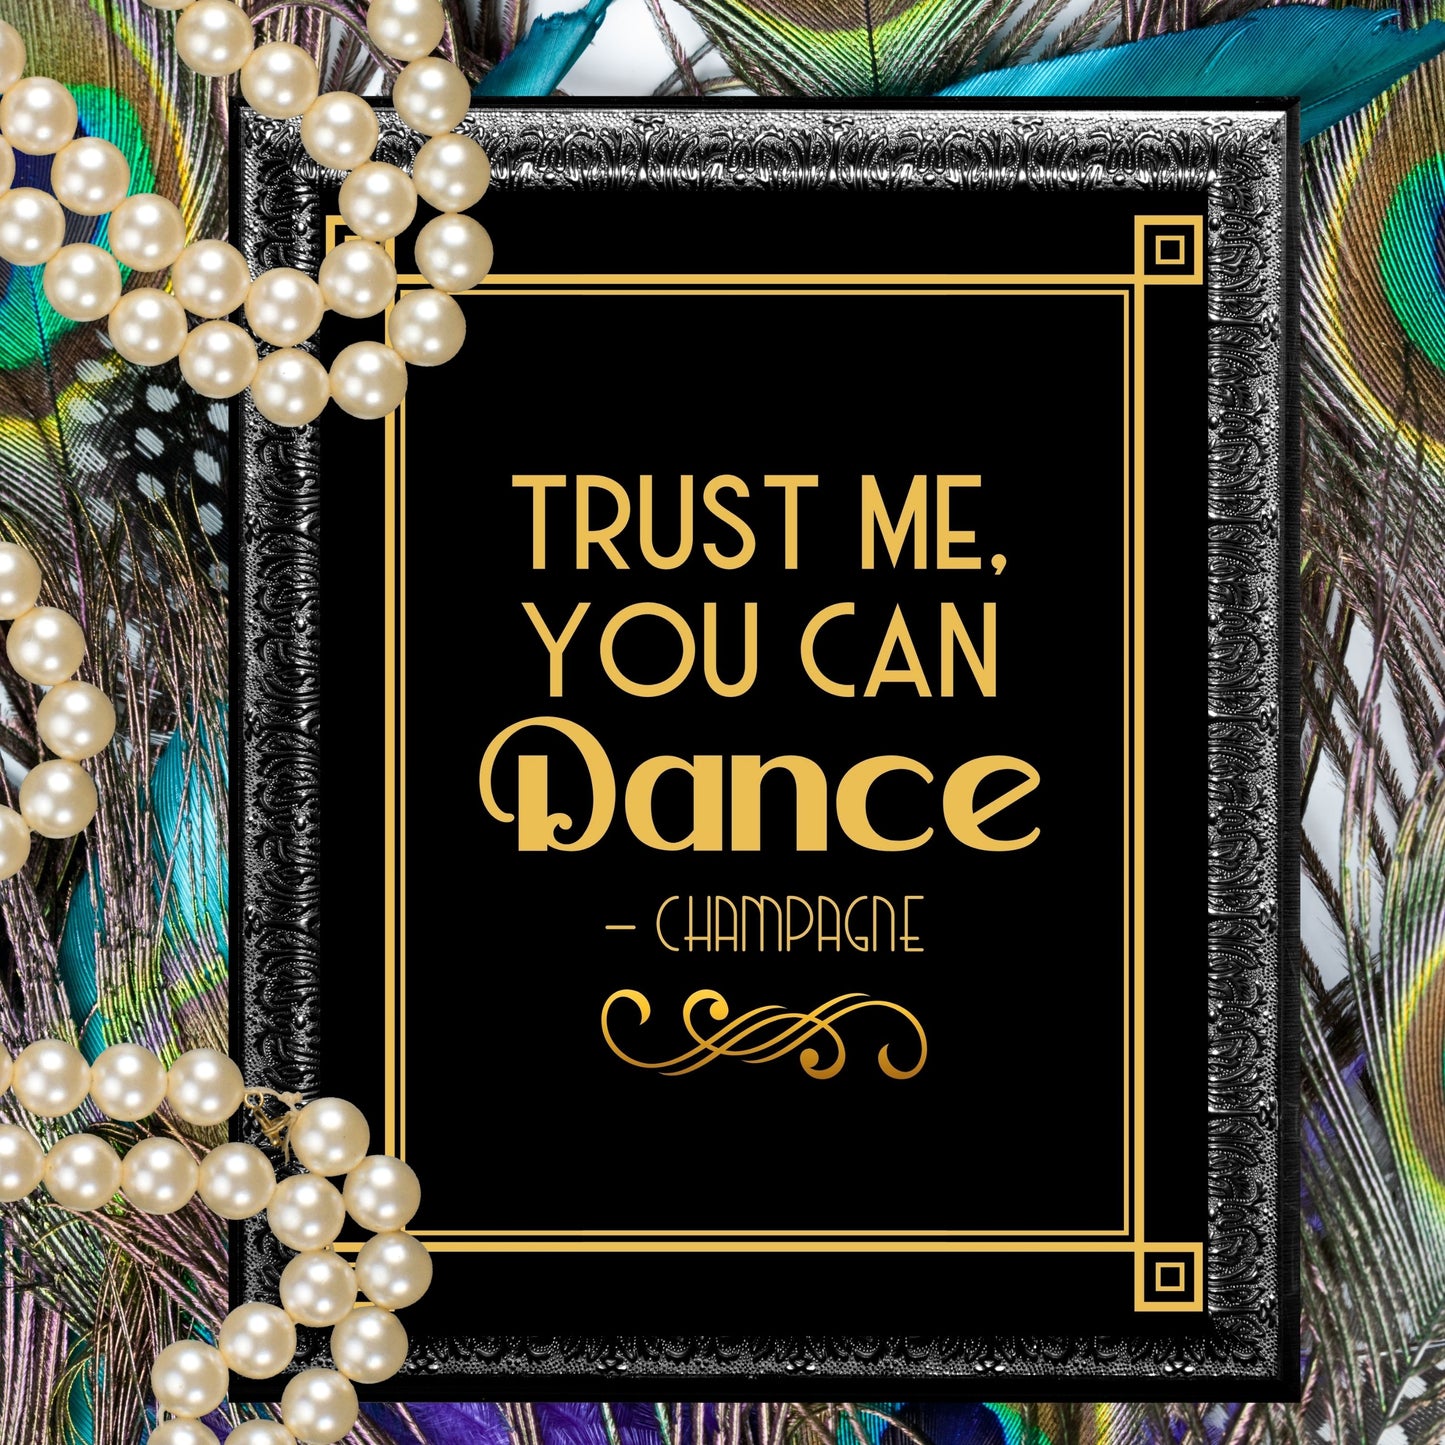 "Trust Me You Can Dance -Champagne" Printable Party Sign For Great Gatsby or Roaring 20's Party Or Wedding,  Black & Gold, Printable Party Decor